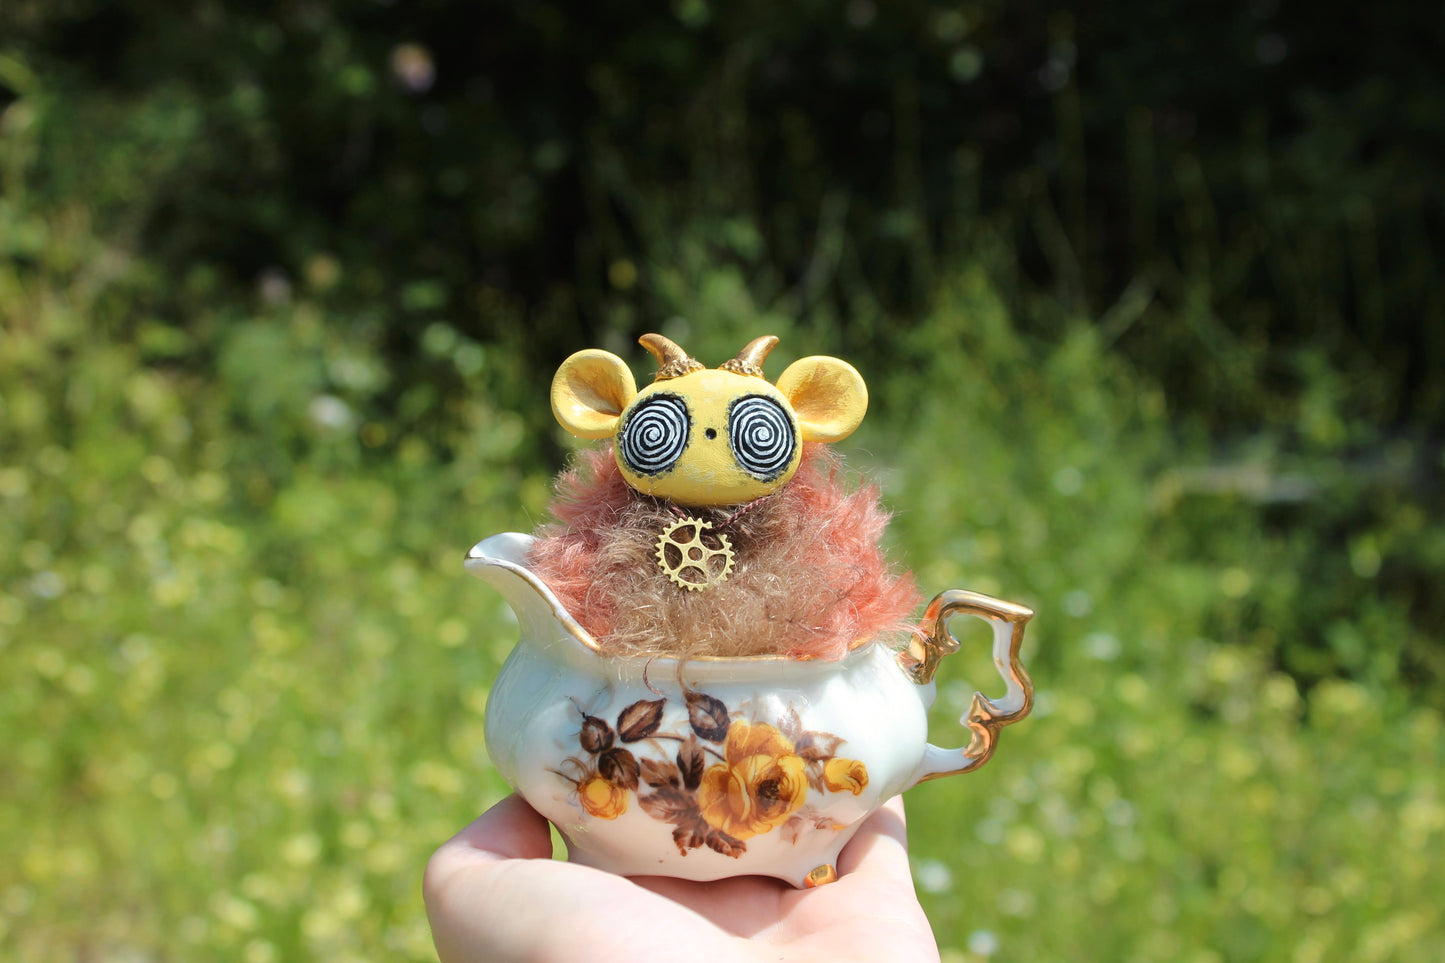 Adelaide the Teacup Critter